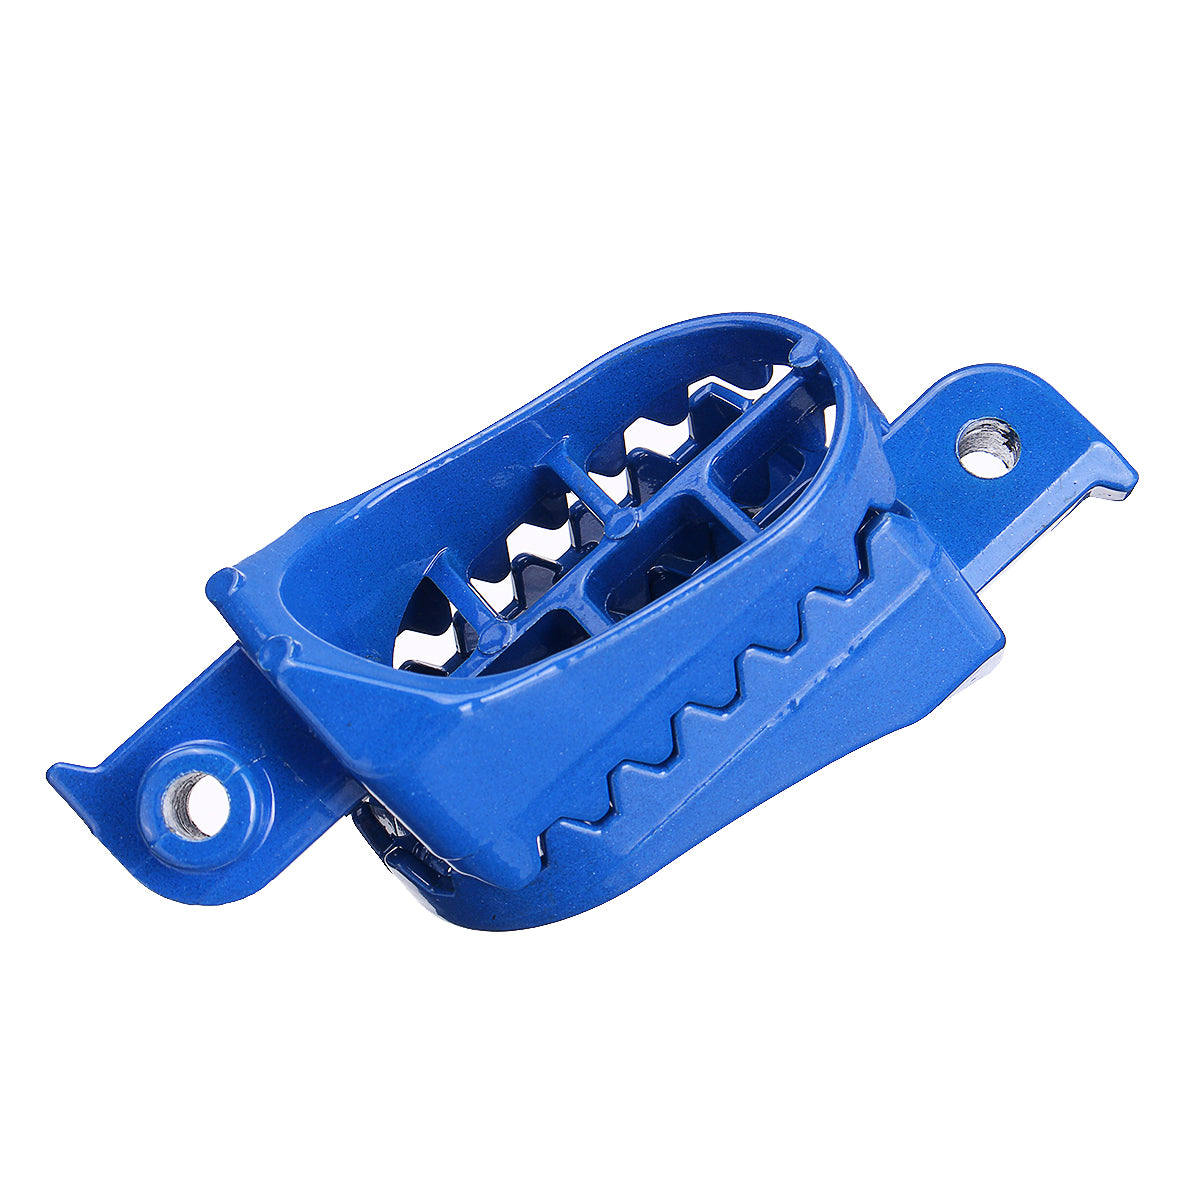 Royal Blue Wide Foot Pegs Footrests For Yamaha PW50 PW80 TW200 Honda XR/CRF Pit Dirt Bike